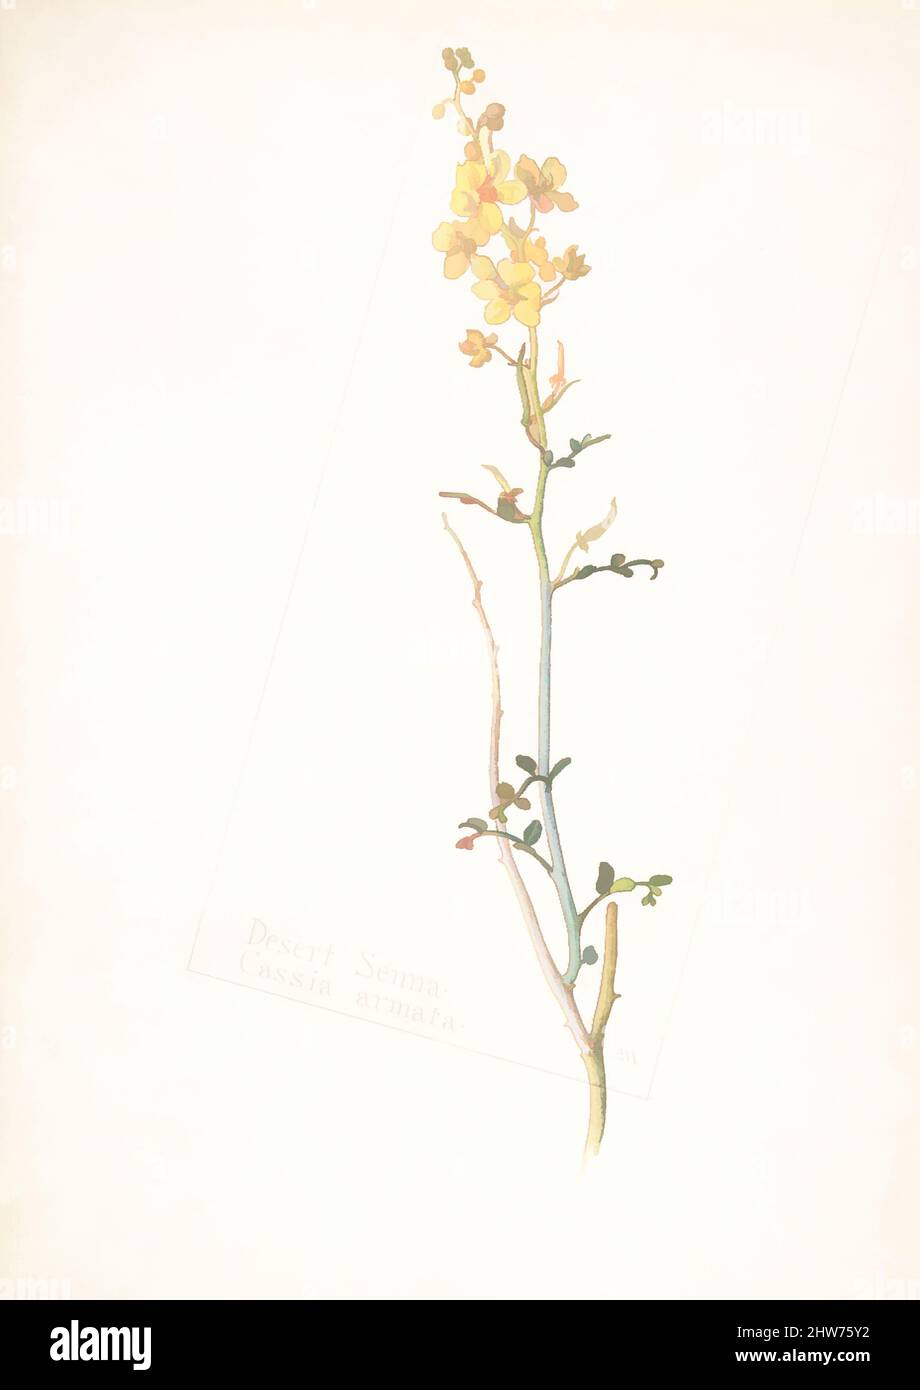 Art inspired by Desert Senna, Cassia armata, May 25, 1912, Watercolor and brown ink over graphite, with page design indicated in graphite, sheet: 13 11/16 x 9 15/16 in. (34.8 x 25.2 cm), Drawings, Margaret Neilson Armstrong (American, New York 1867–1944 New York, Classic works modernized by Artotop with a splash of modernity. Shapes, color and value, eye-catching visual impact on art. Emotions through freedom of artworks in a contemporary way. A timeless message pursuing a wildly creative new direction. Artists turning to the digital medium and creating the Artotop NFT Stock Photo